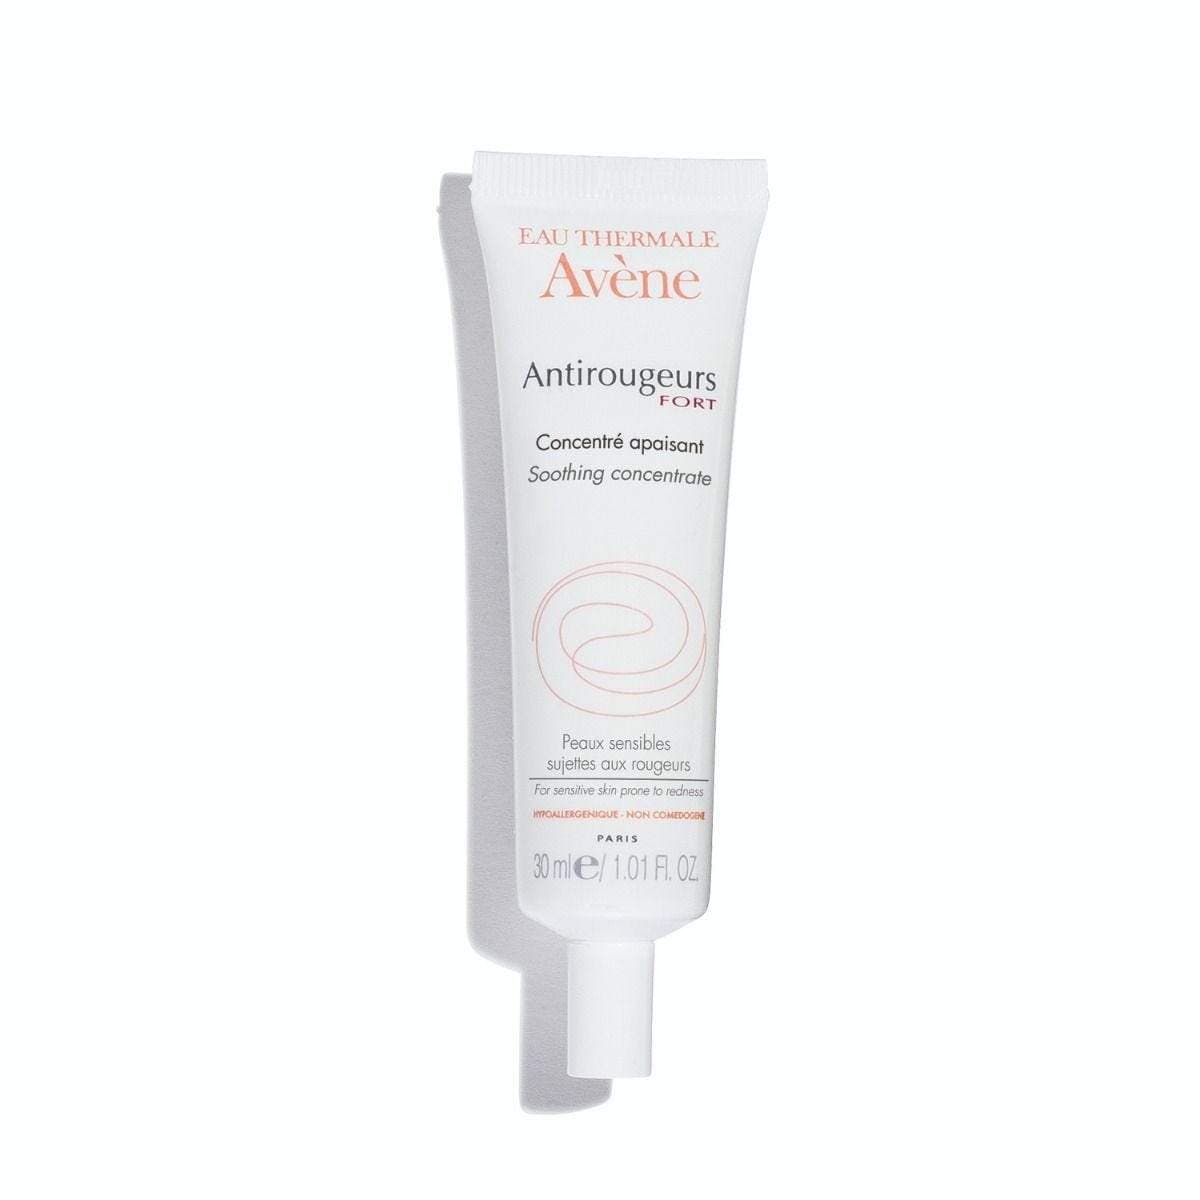 Avène Antirougeurs Fort Soothing Concentrate